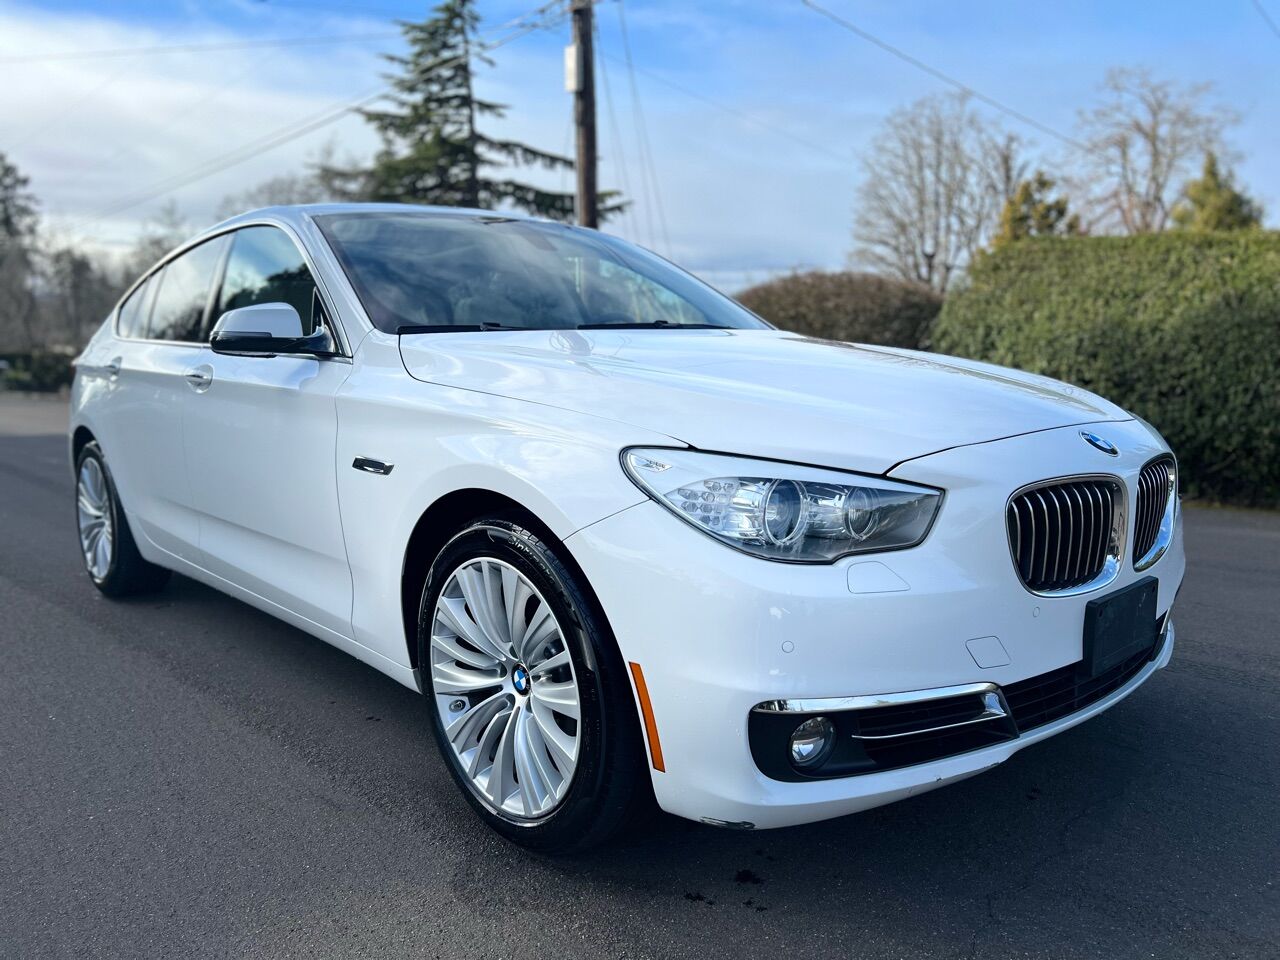 2015 BMW 5 Series For Sale In Oregon City, OR - Carsforsale.com®